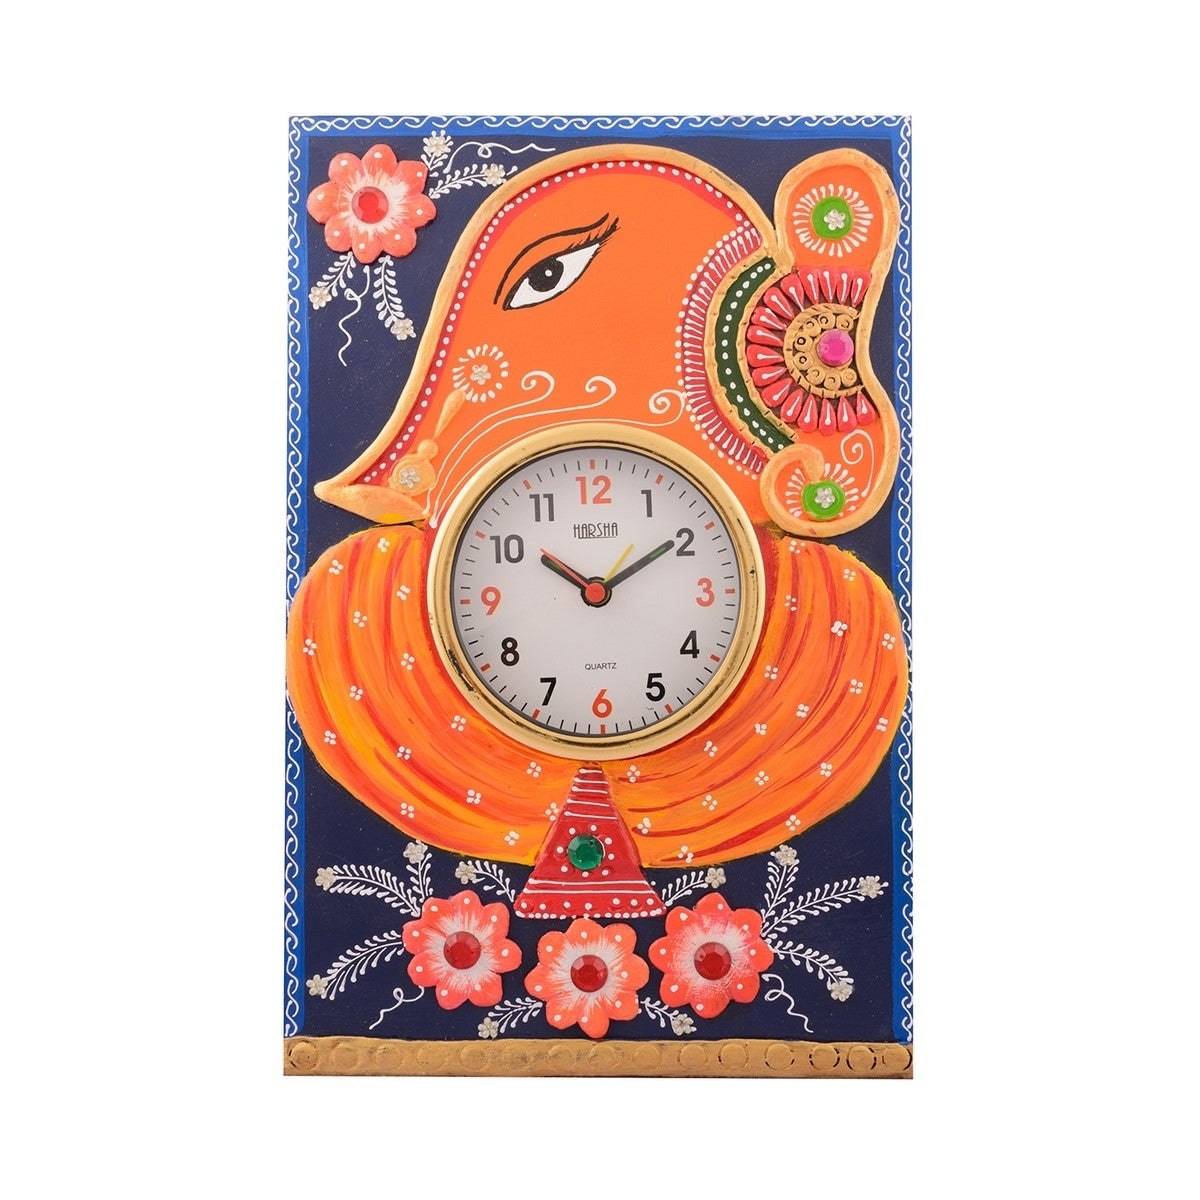 Wooden Papier Mache Lord Ganesha Artistic Handcrafted Wall Clock